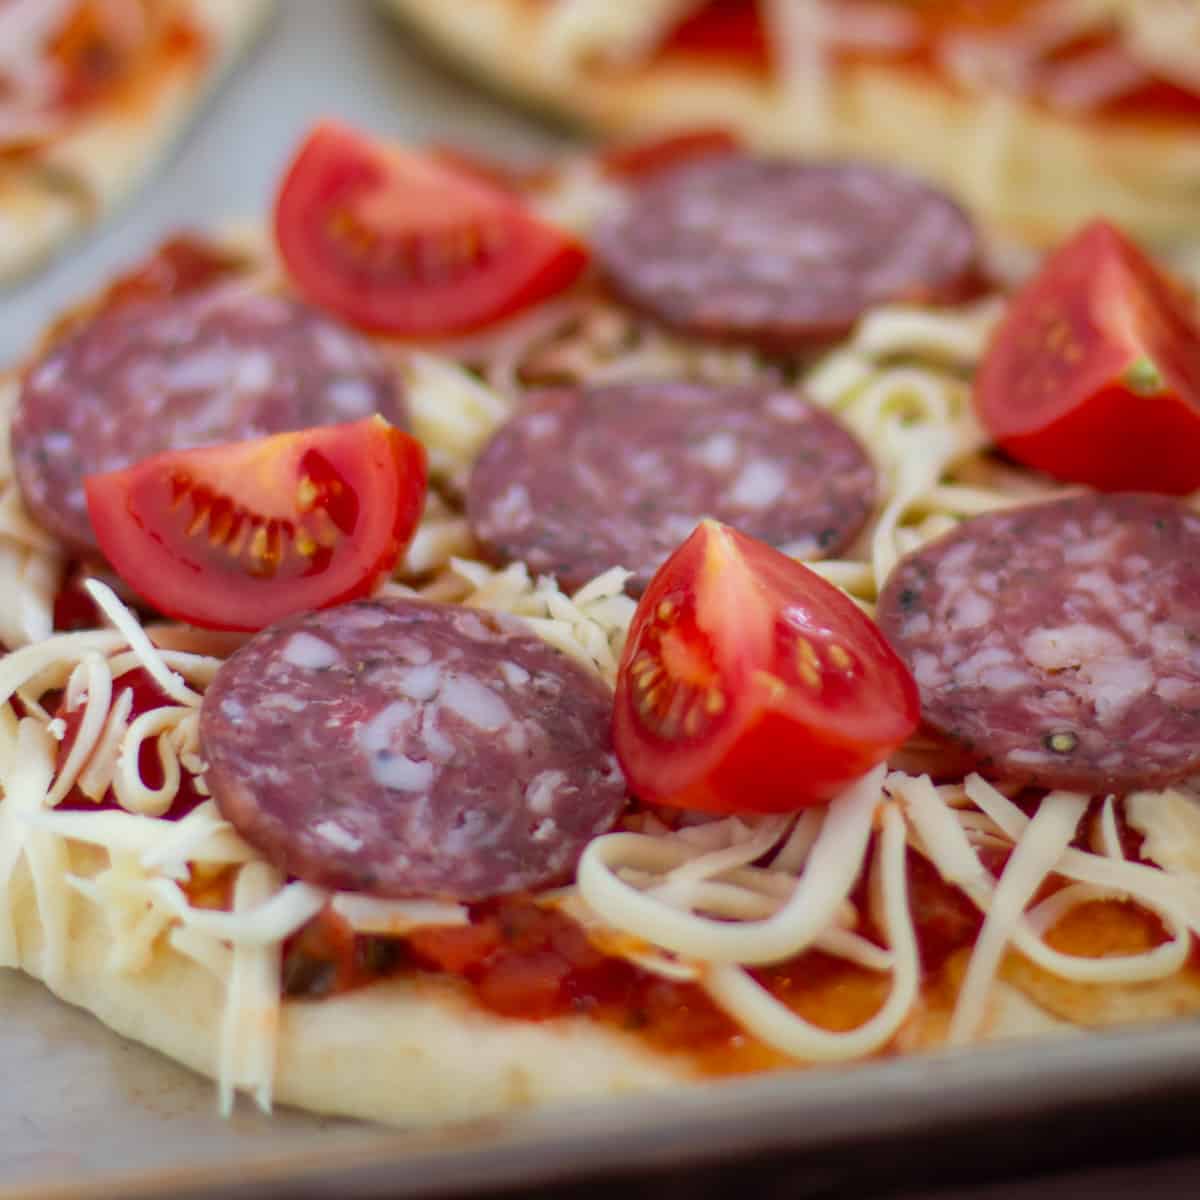 Assembling a pizza with salami and tomatoes.